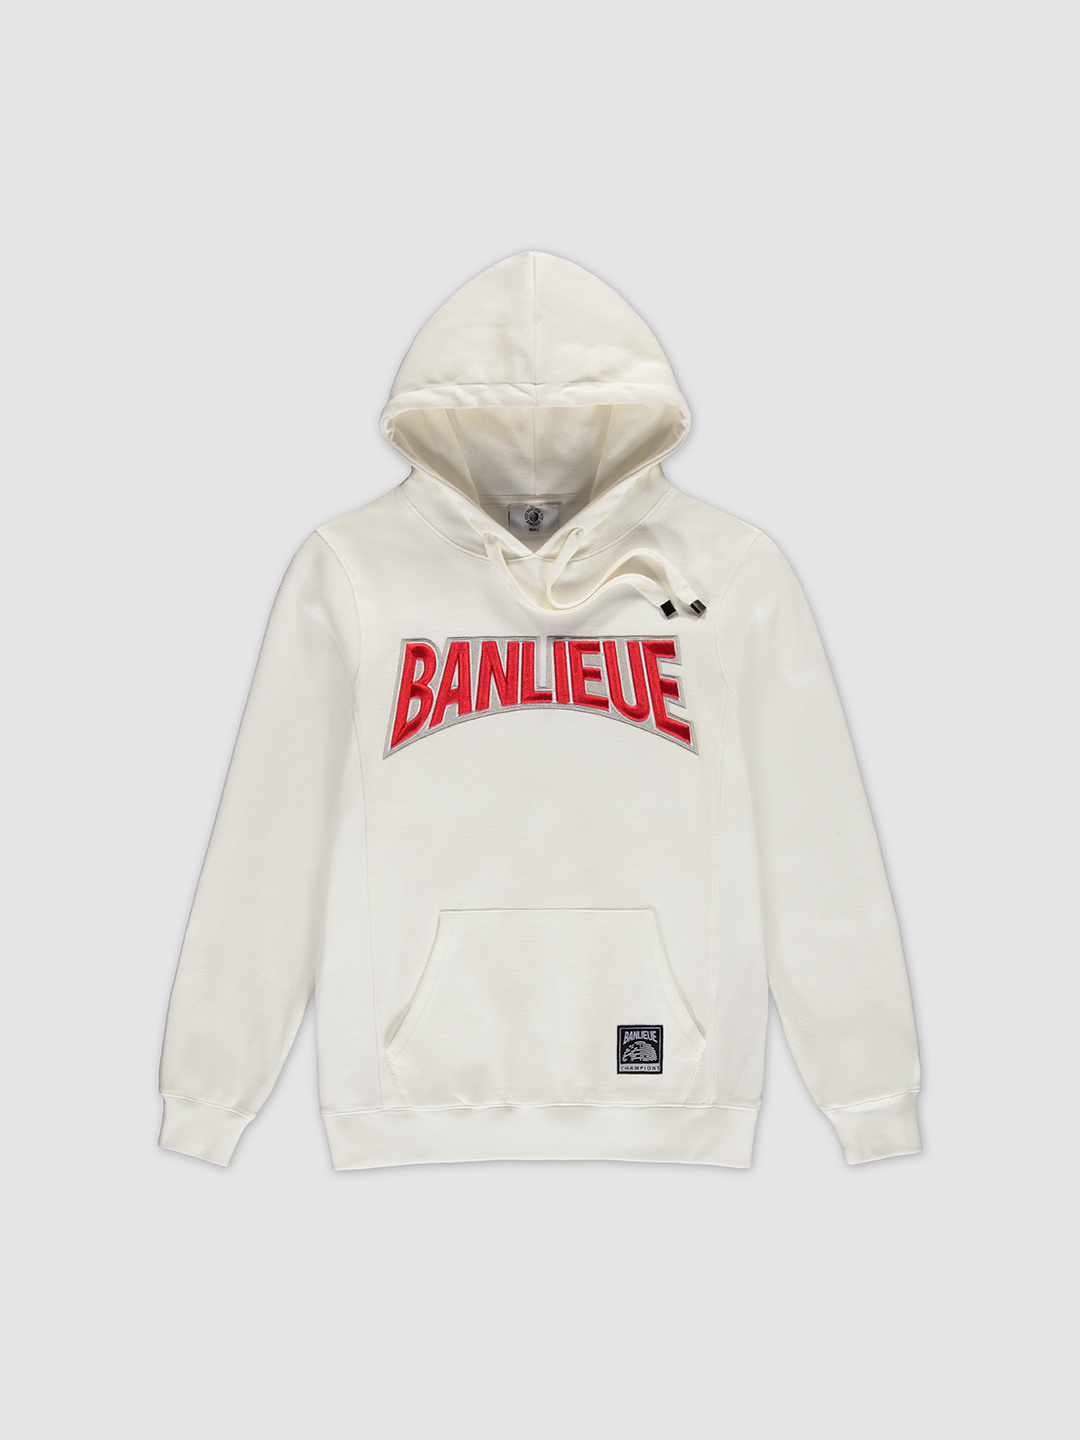 white and red champion hoodie